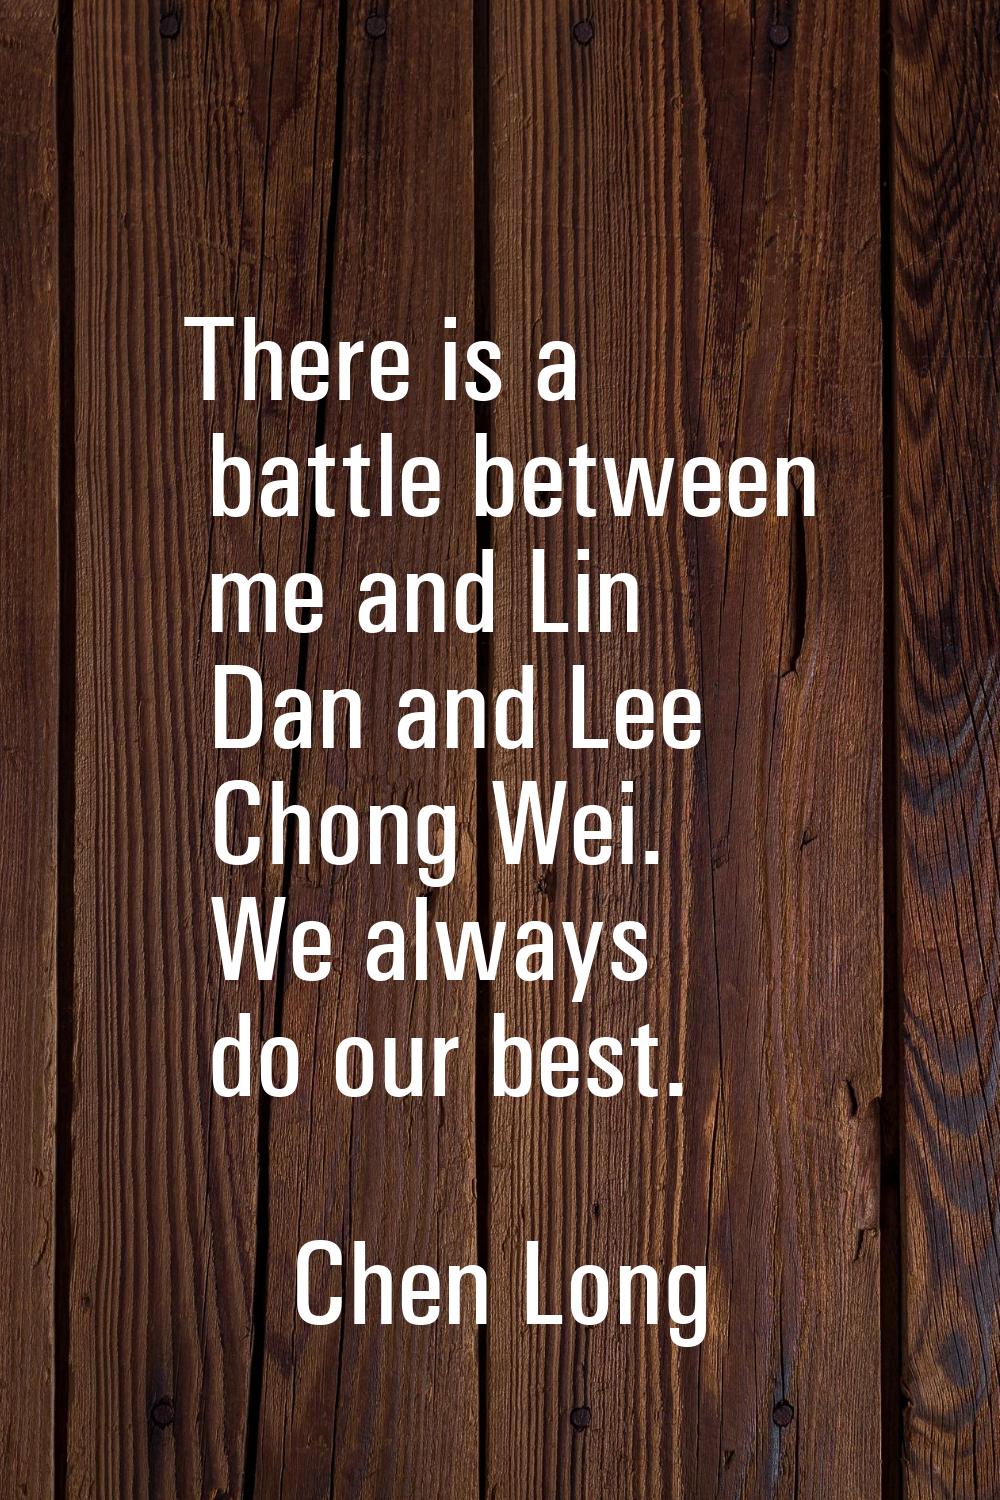 There is a battle between me and Lin Dan and Lee Chong Wei. We always do our best.